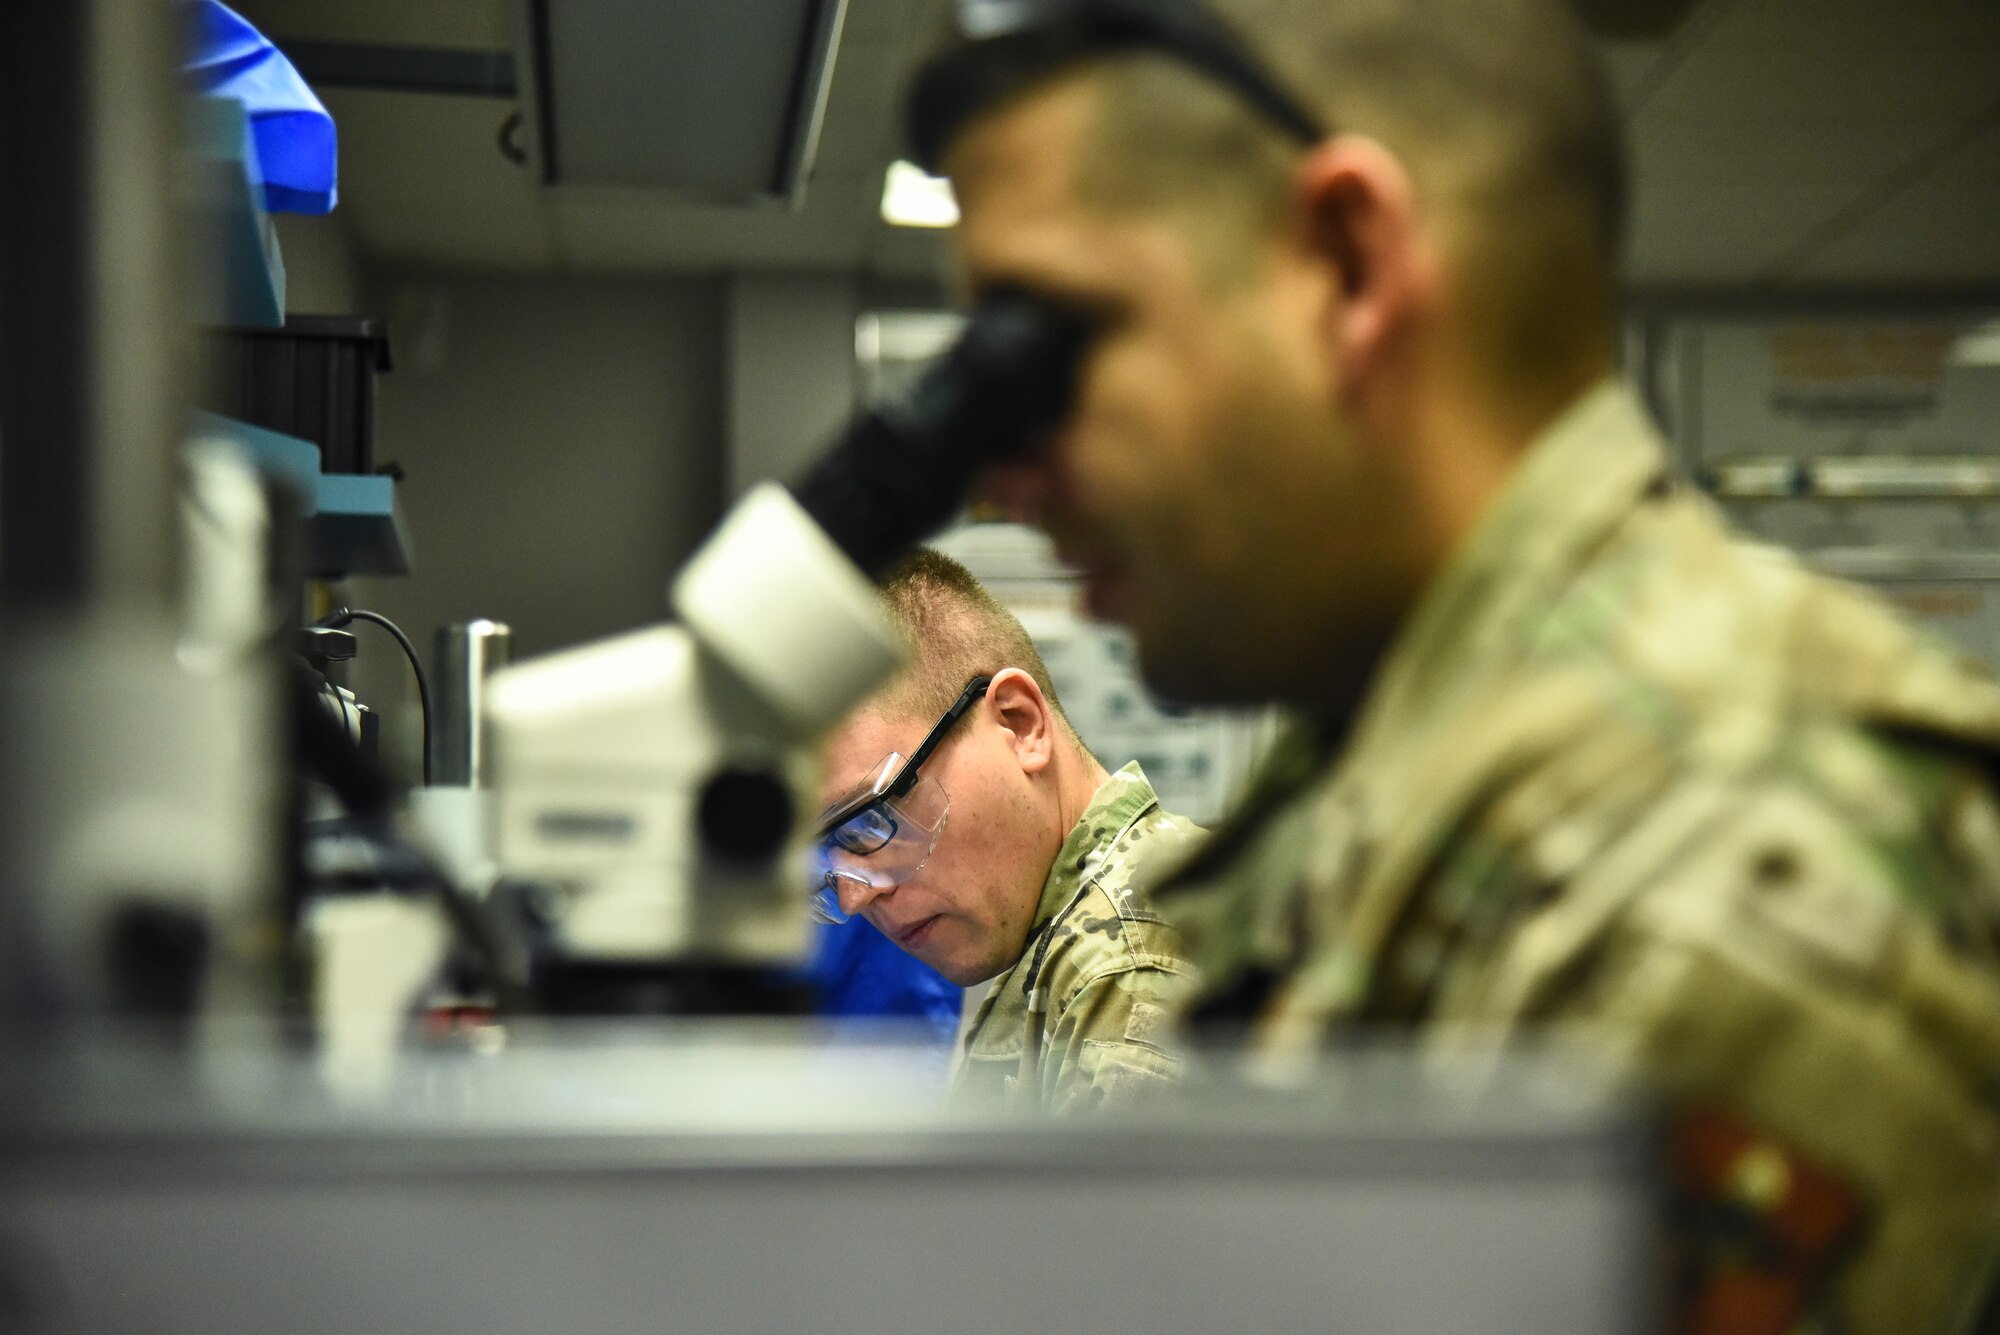 Students assigned to the 372d Training Squadron, Detachment 11, solder microchips at Davis-Monthan Air Force Base, Ariz., June 4, 2019. The 372d TRS, Det. 11, is a unit specifically dedicated to improving maintenance Airmen skills surrounding the many lethal aircraft assigned to the 355th Wing at D-M. (U.S. Air Force photo by Senior Airman Mya M. Crosby)